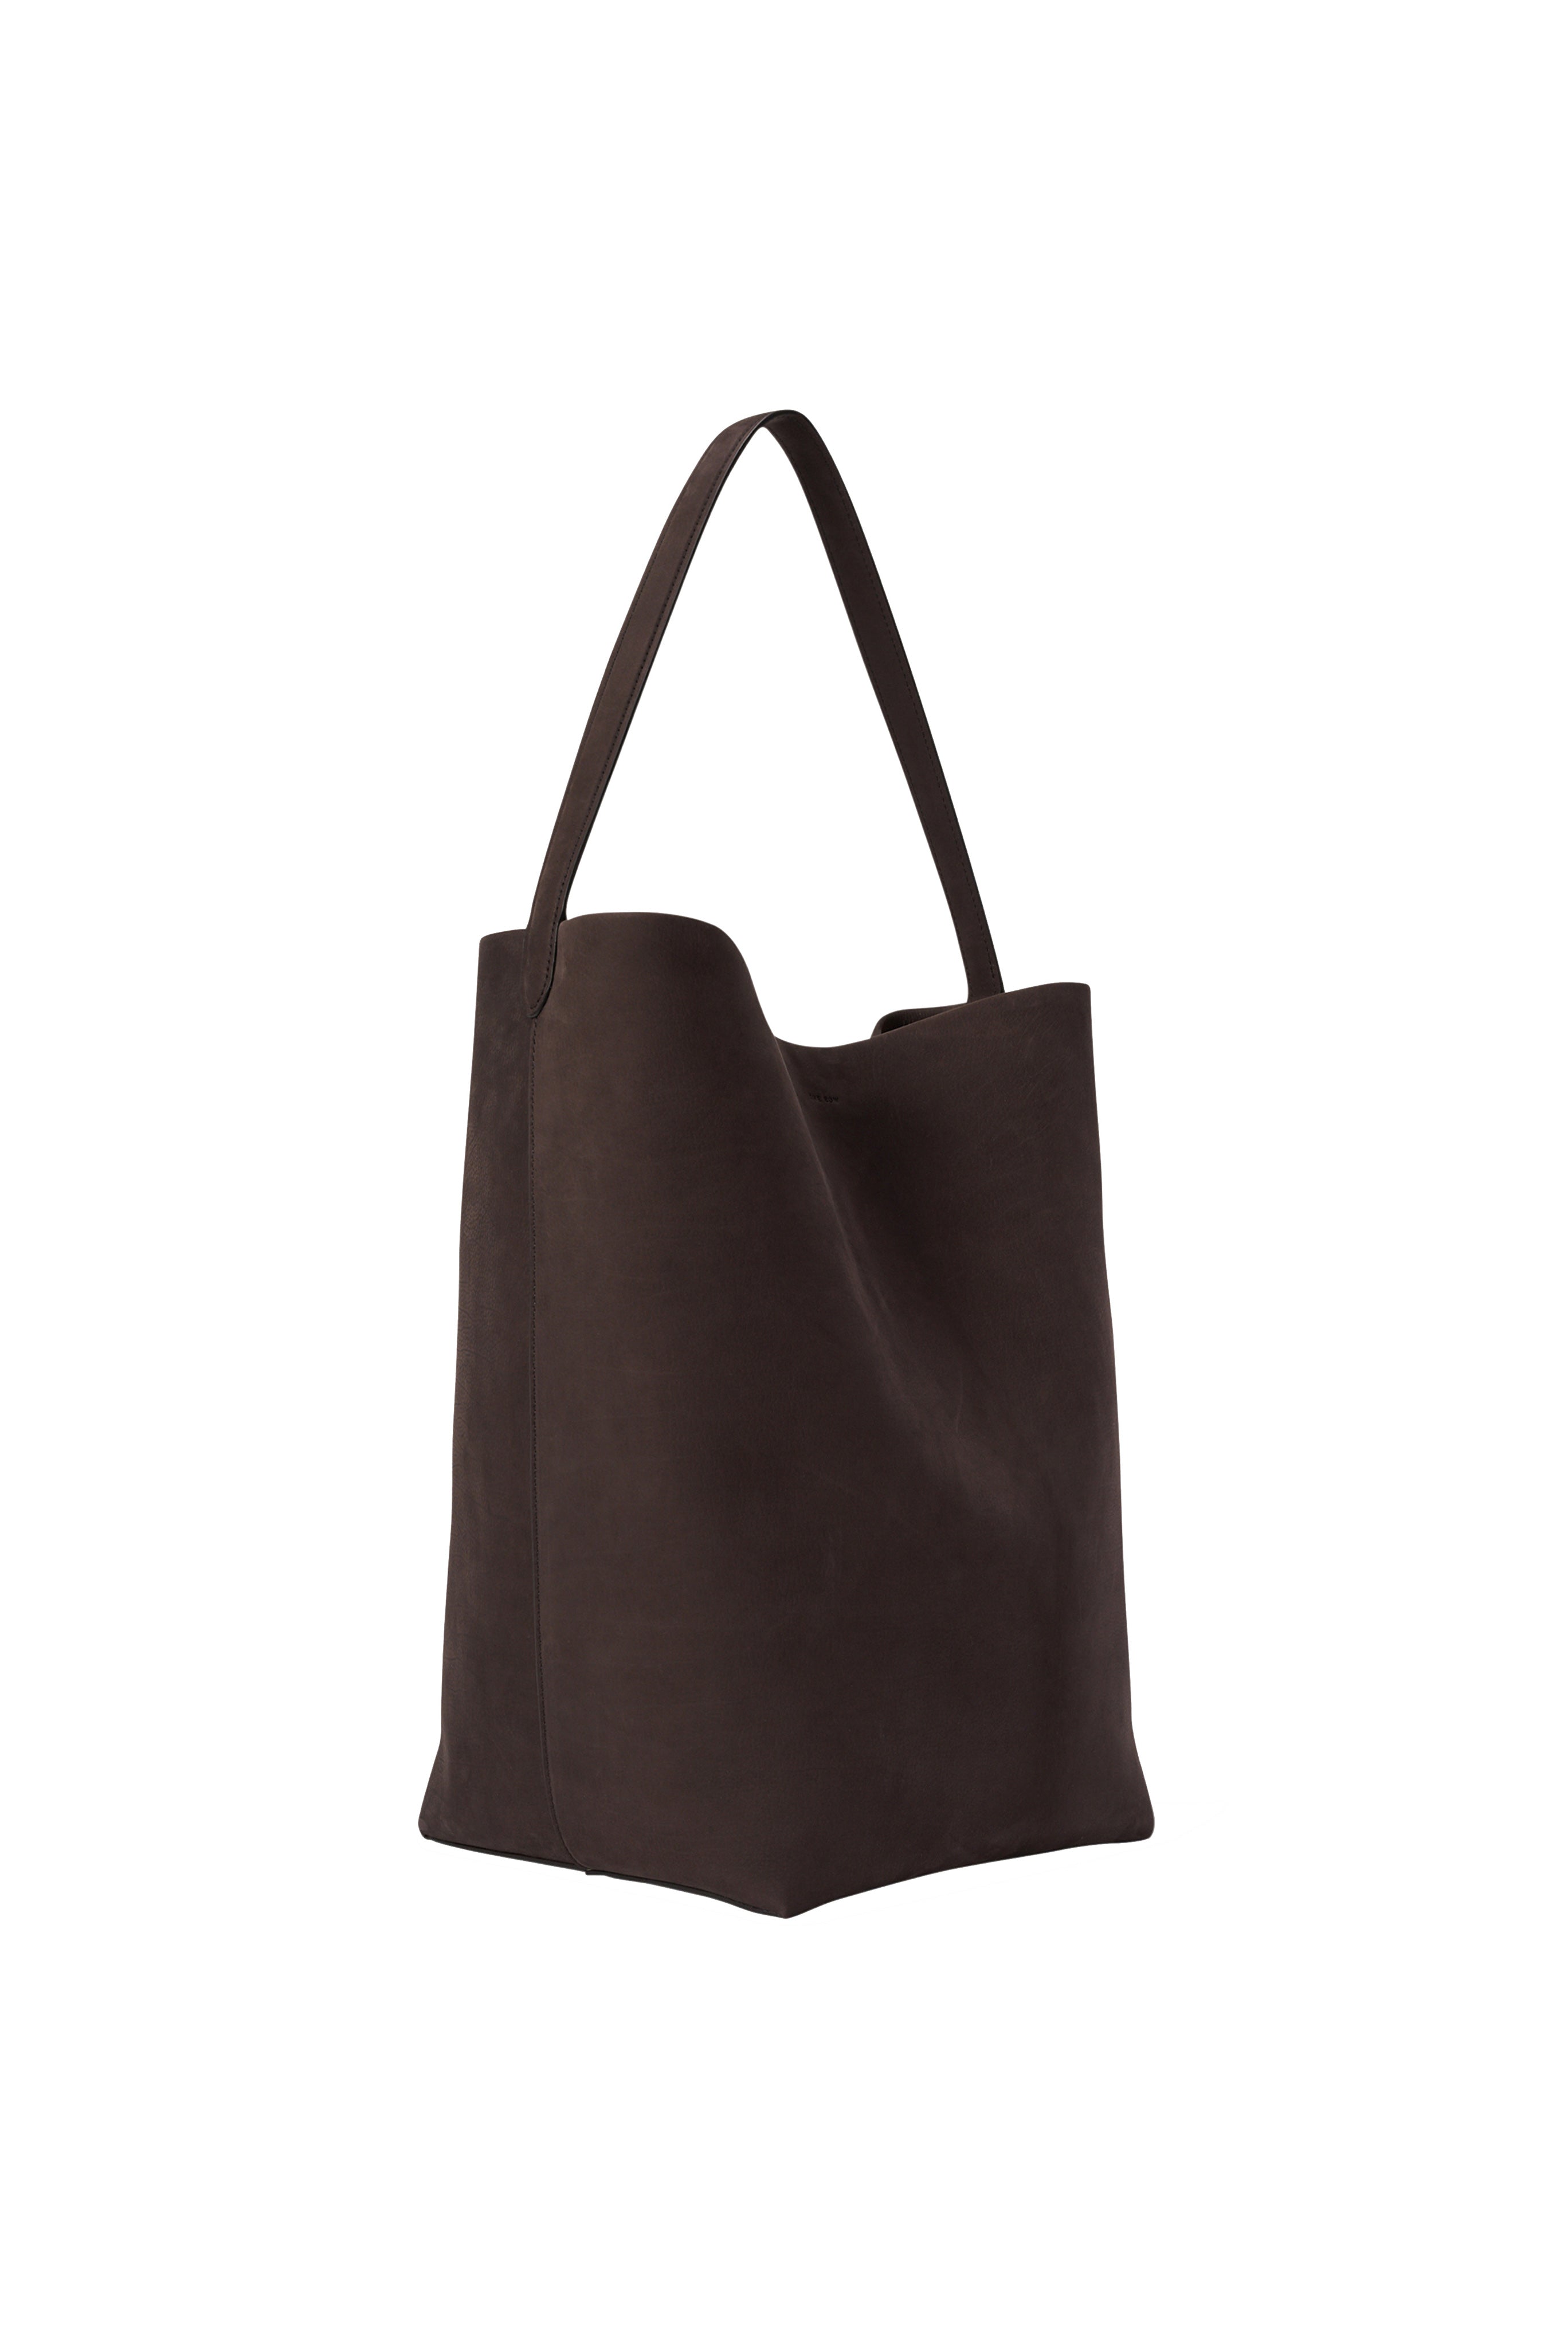 The Row Suede Park Tote in Wood Brown